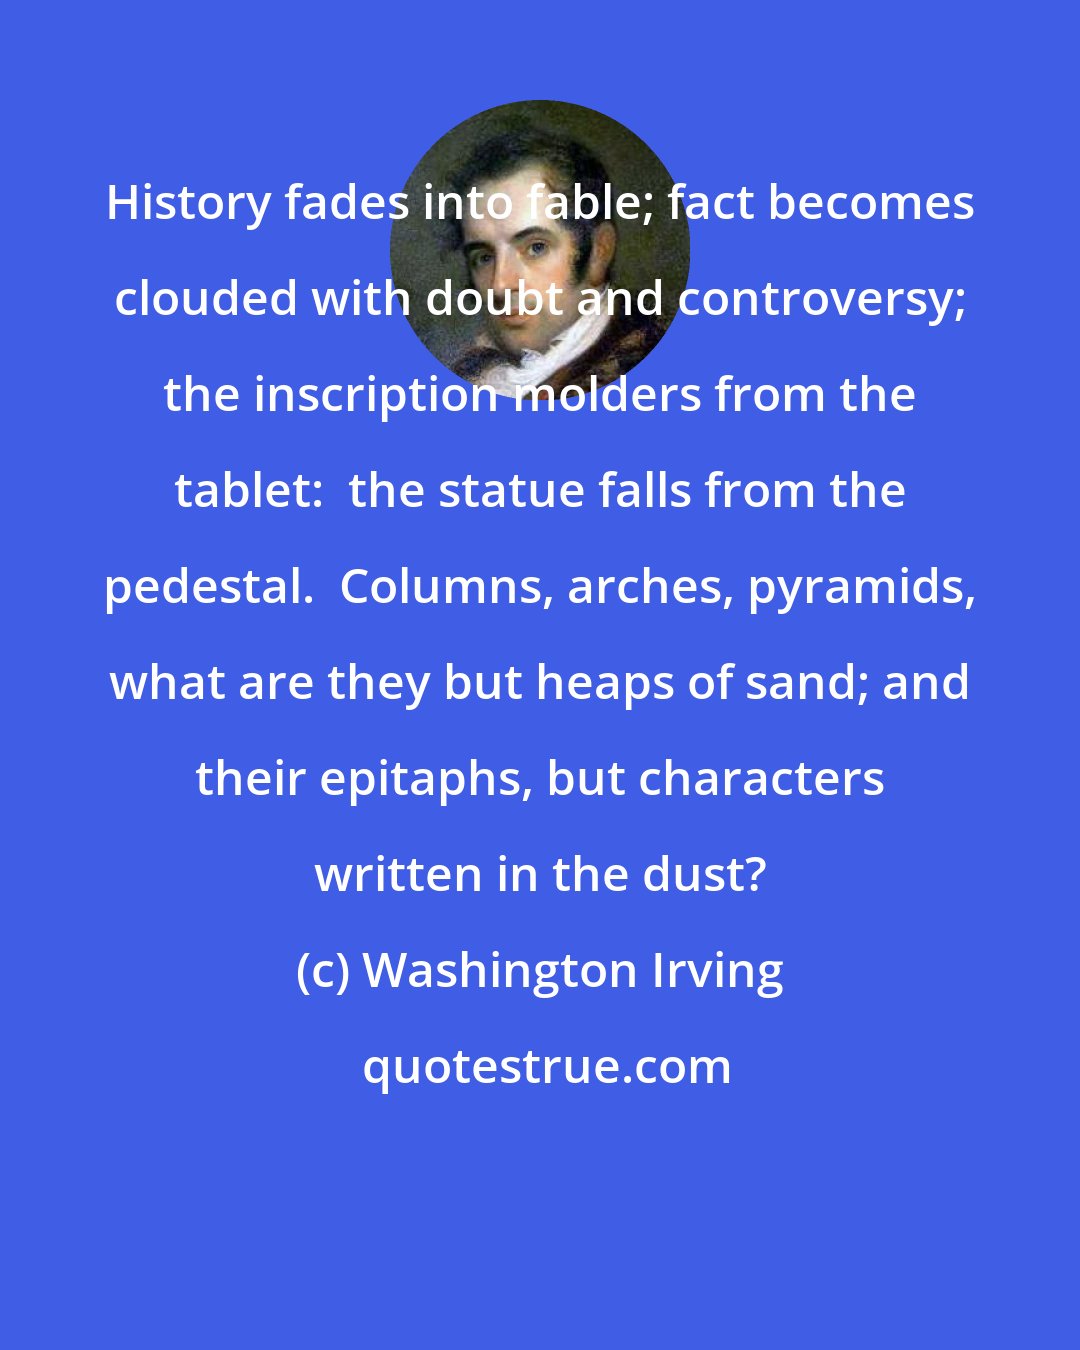 Washington Irving: History fades into fable; fact becomes clouded with doubt and controversy; the inscription molders from the tablet:  the statue falls from the pedestal.  Columns, arches, pyramids, what are they but heaps of sand; and their epitaphs, but characters written in the dust?